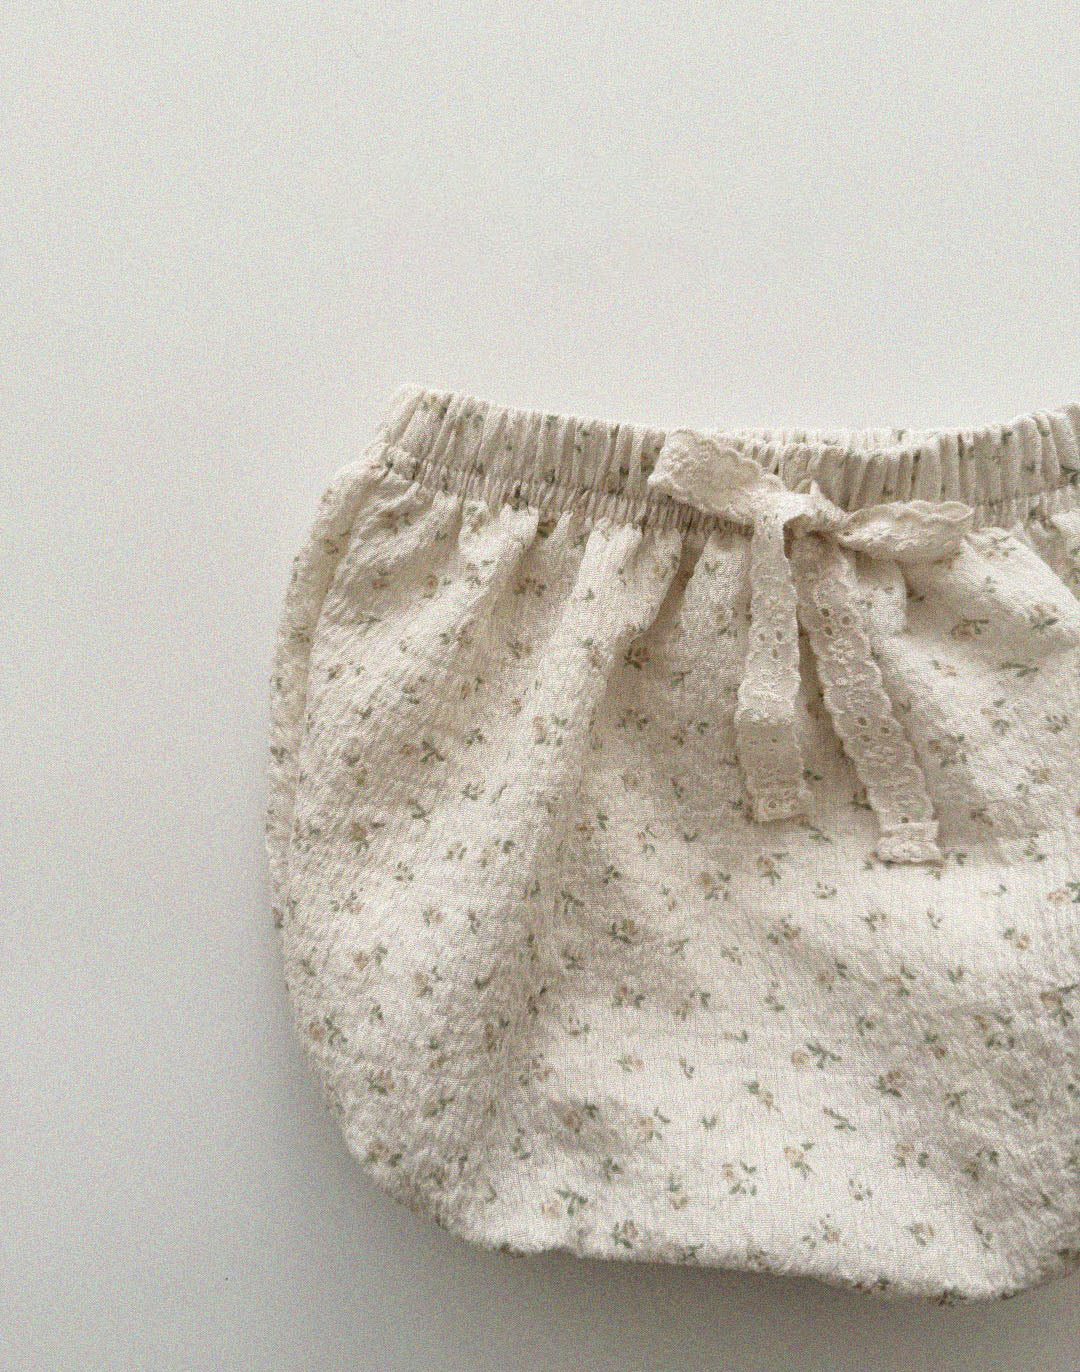 Baby/Toddler Aosta Lace Bow Floral Bloomer Shorts  (3m-3y)- 2 Colors